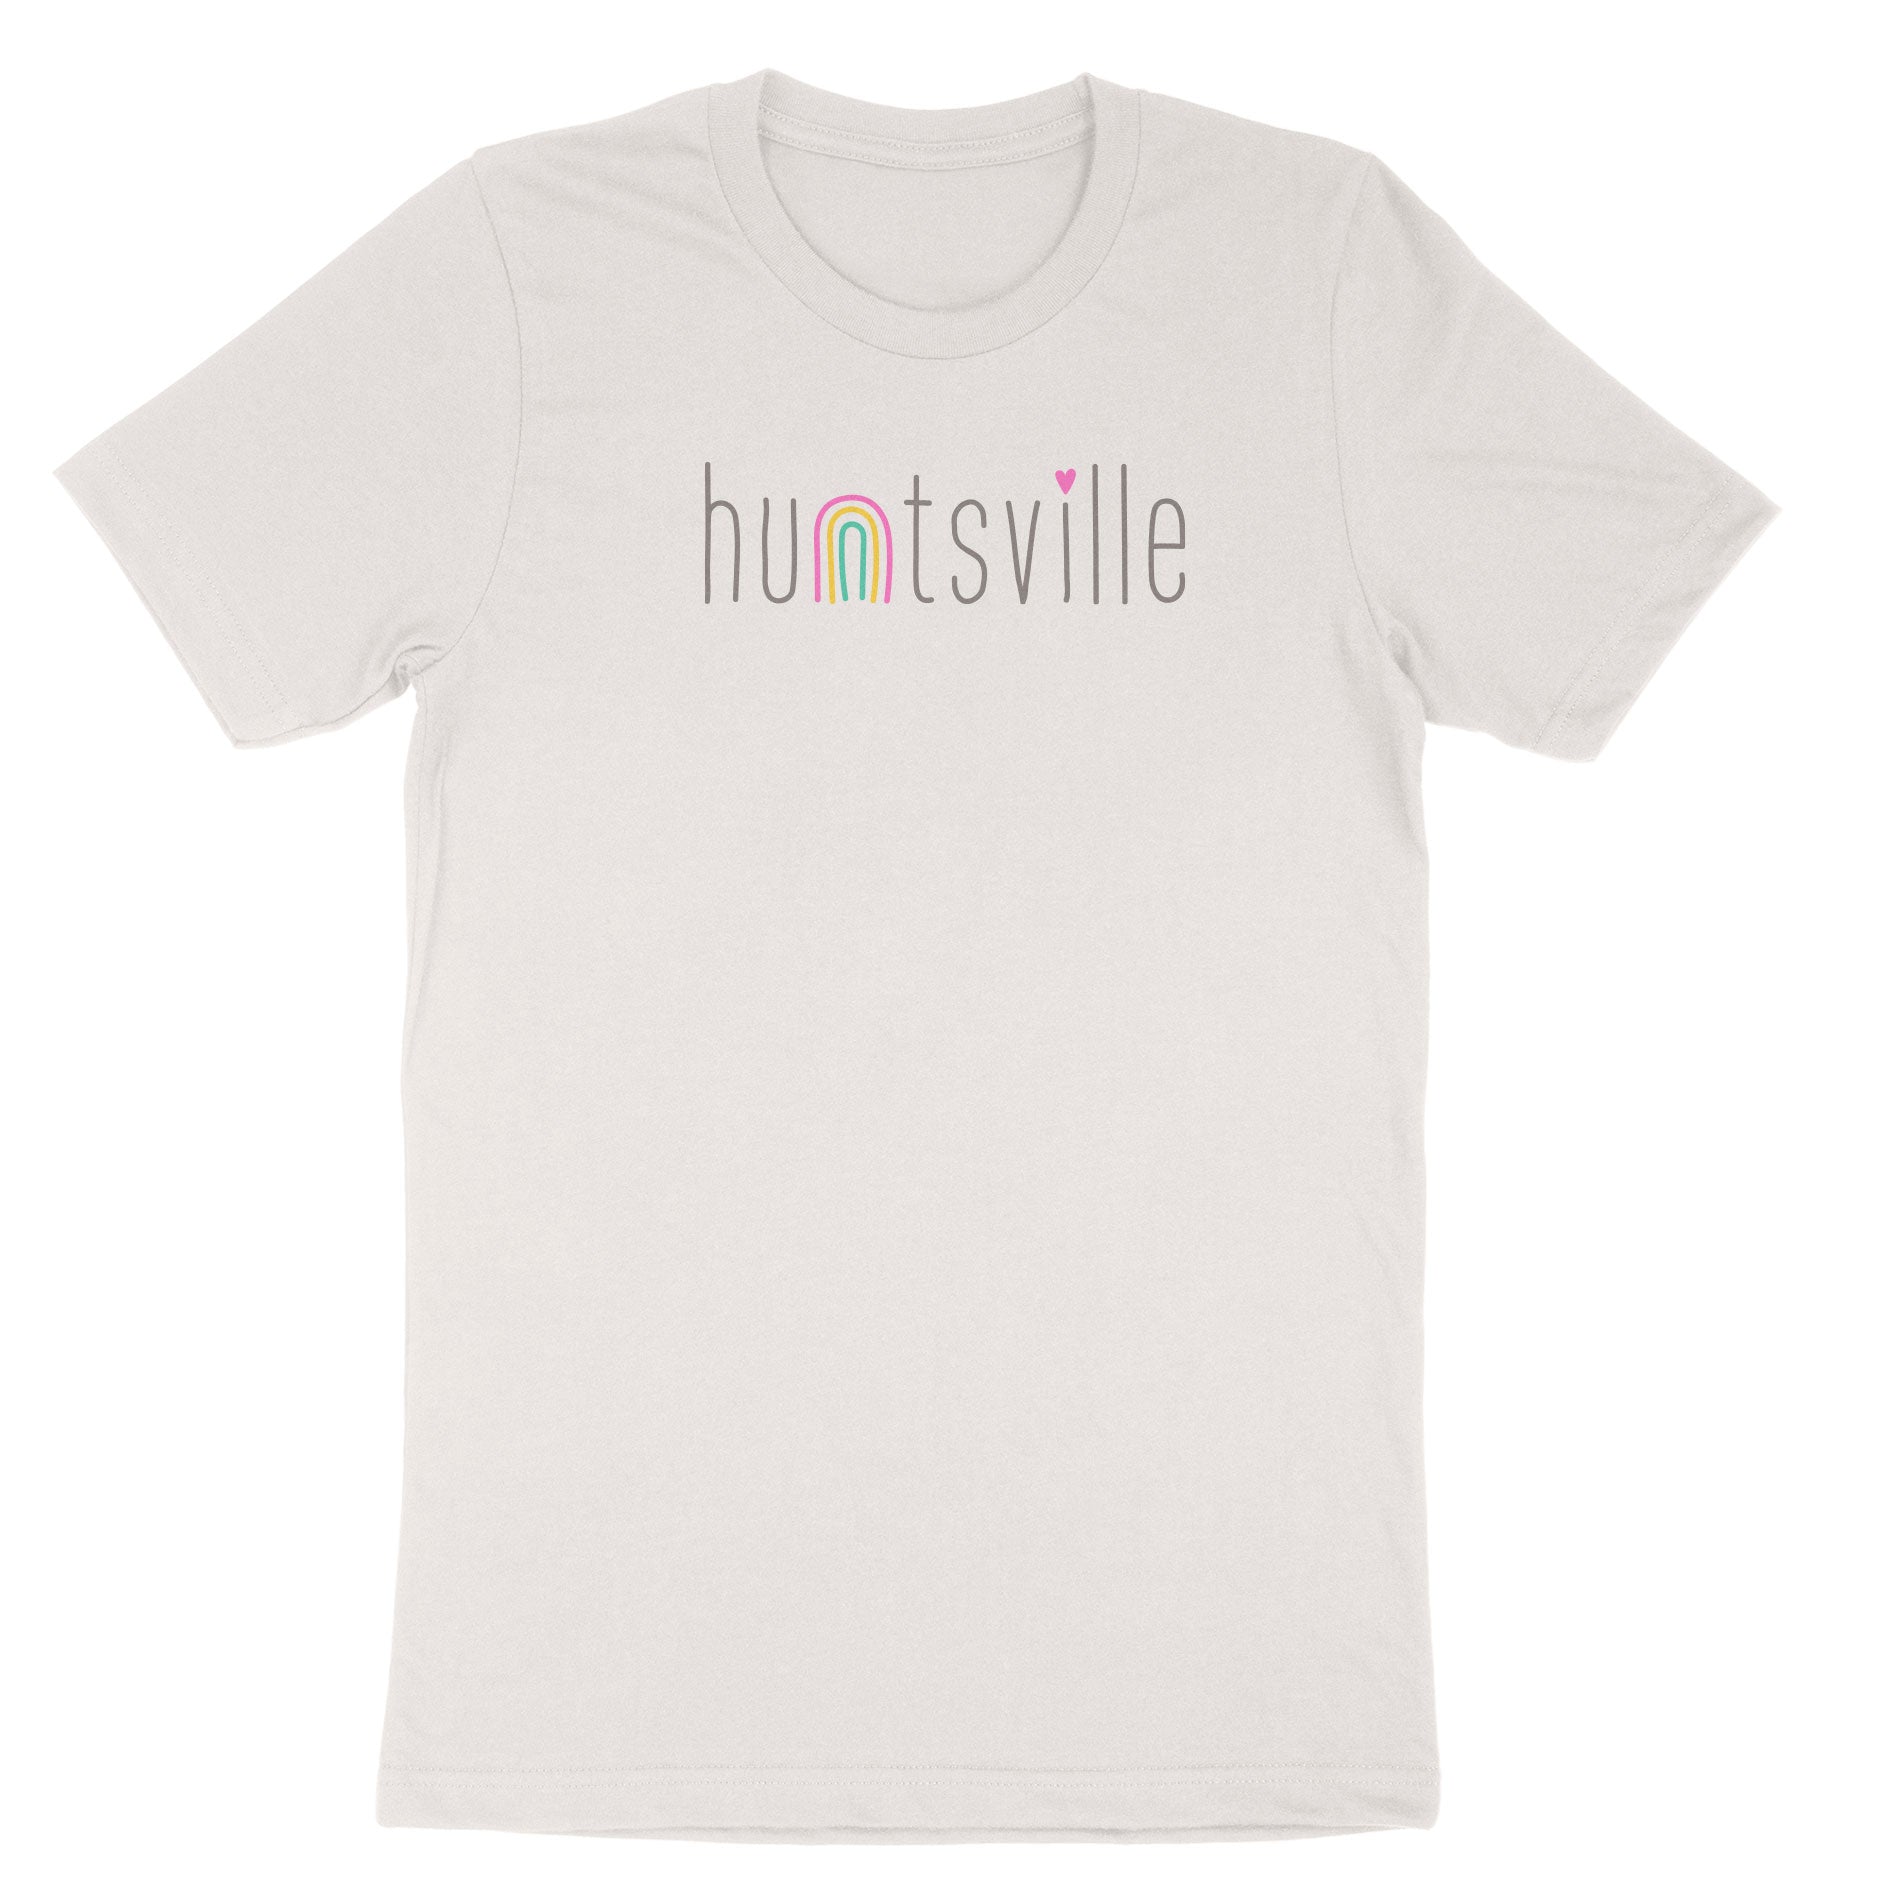 the text "huntsville" with a rainbow as the n design on a white t-shirt